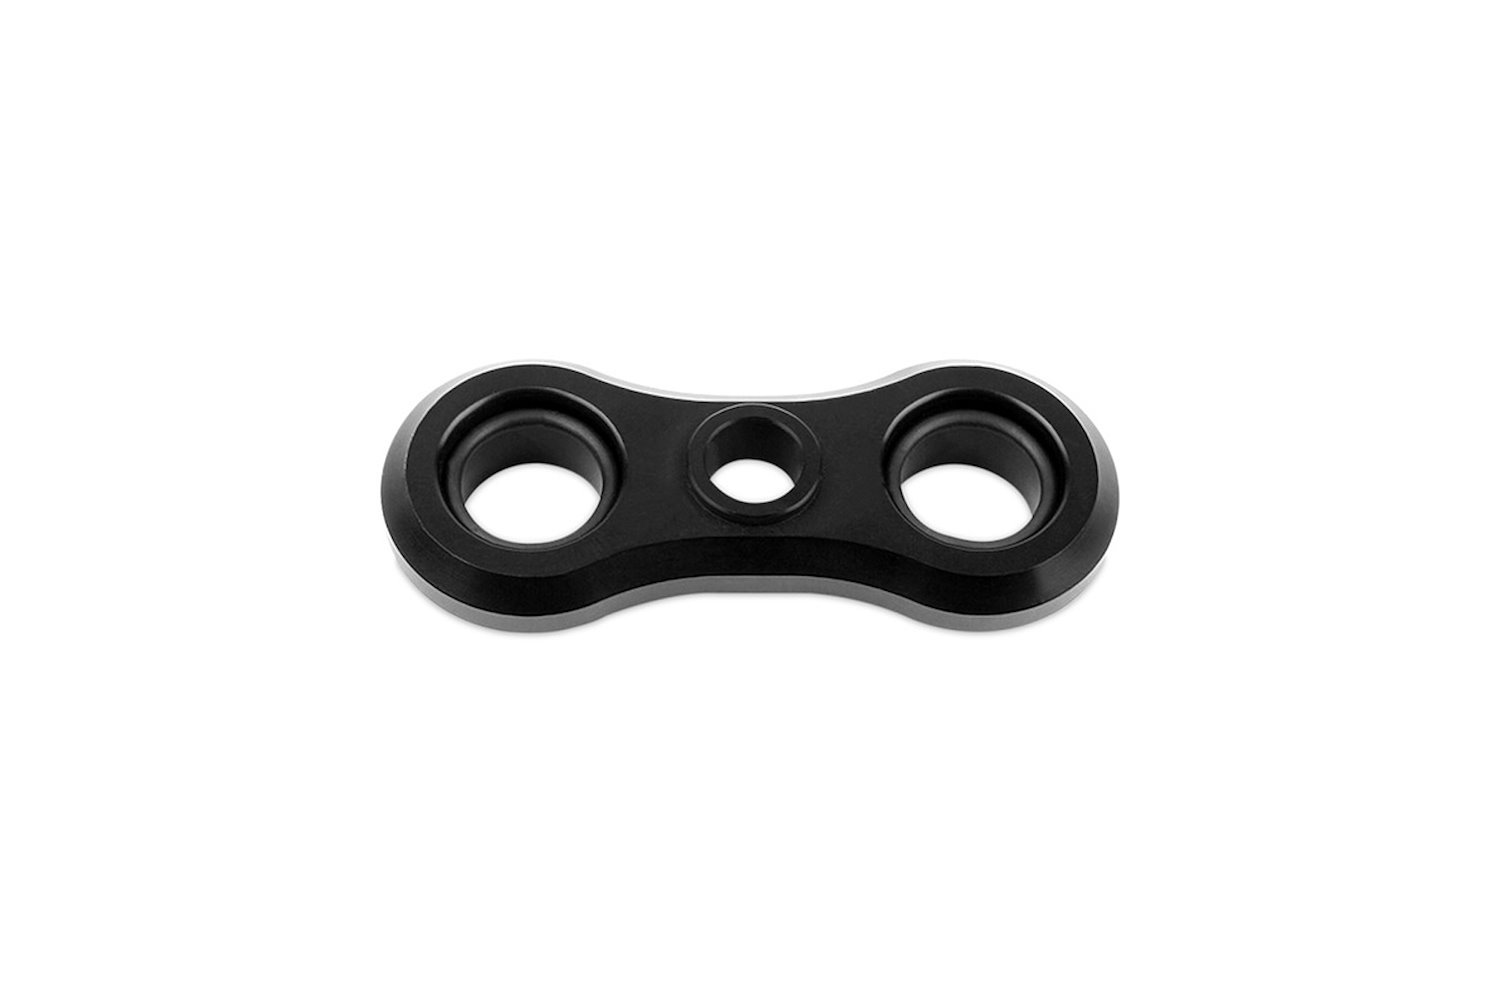 EBW-100-98 Factory Oil Line Adapter For EBW-100 BMW Oil Cooler Adapter